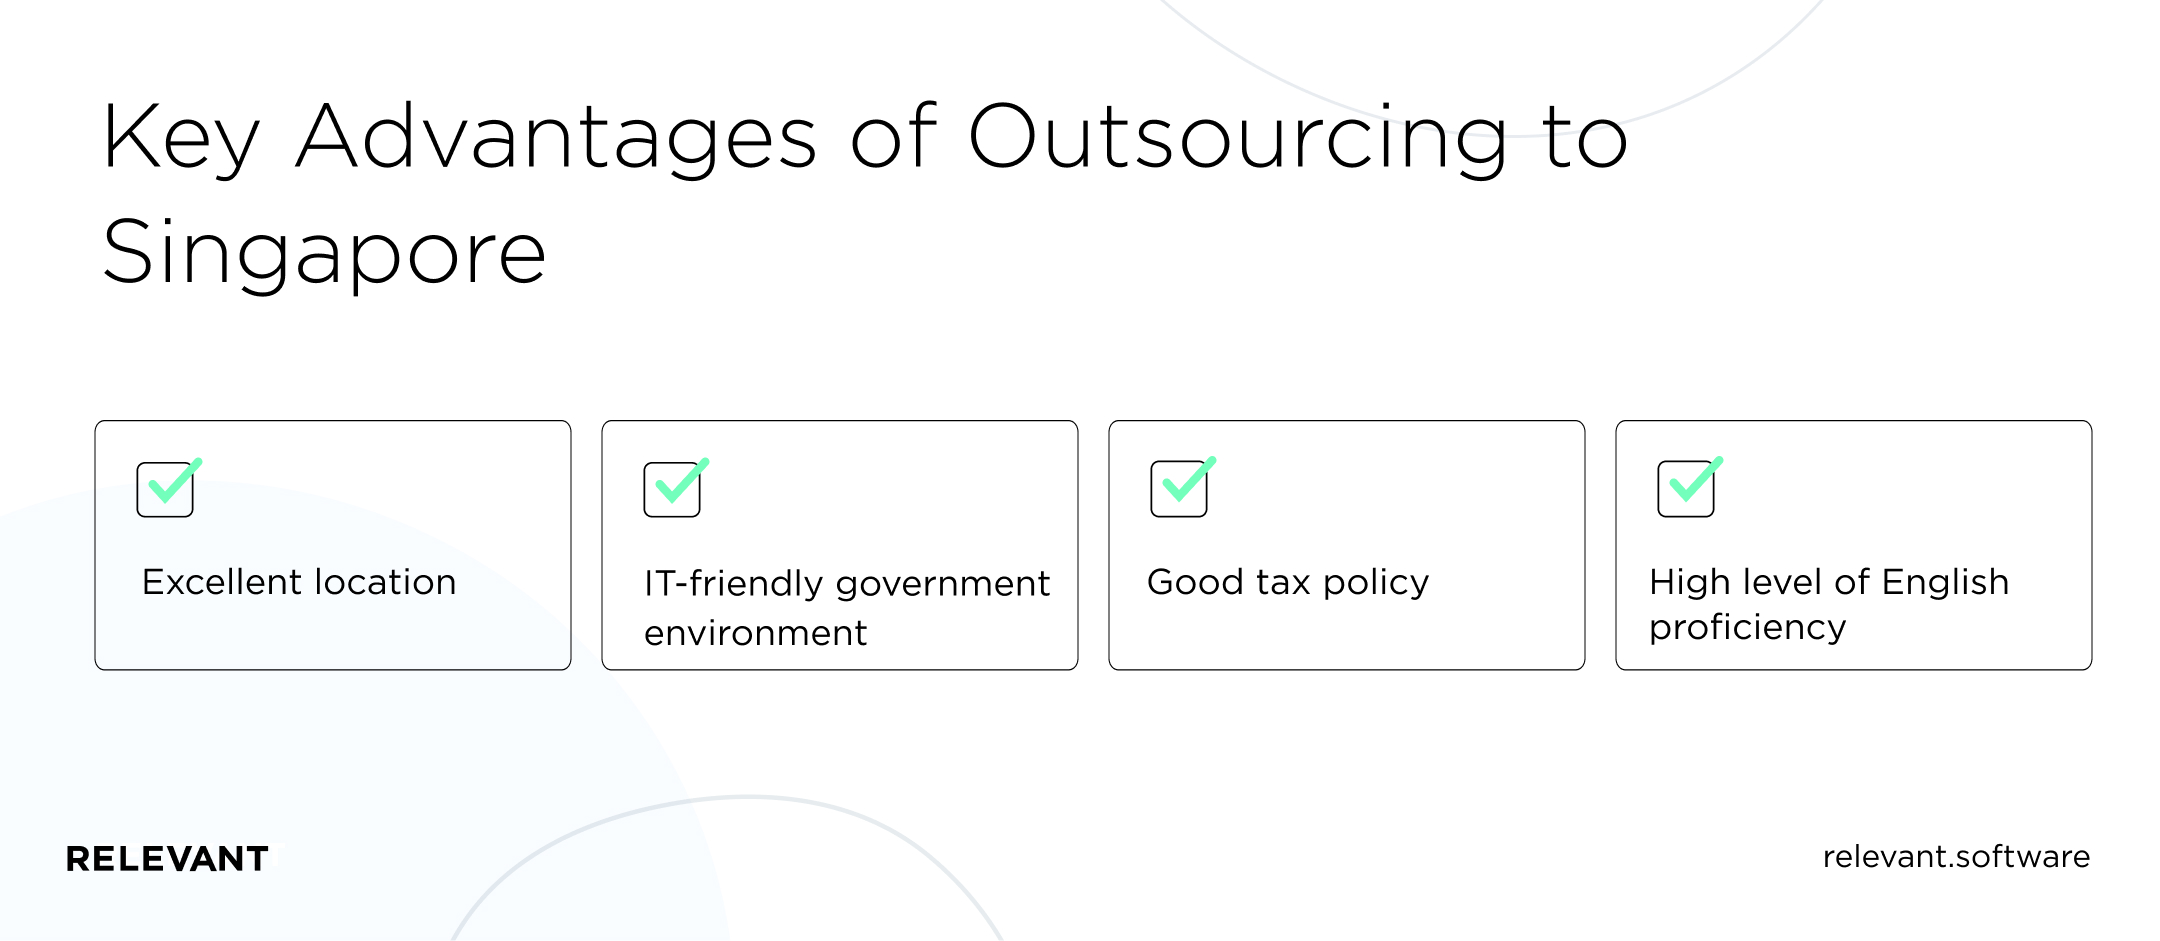 Advantages of outsourcing to Singapore